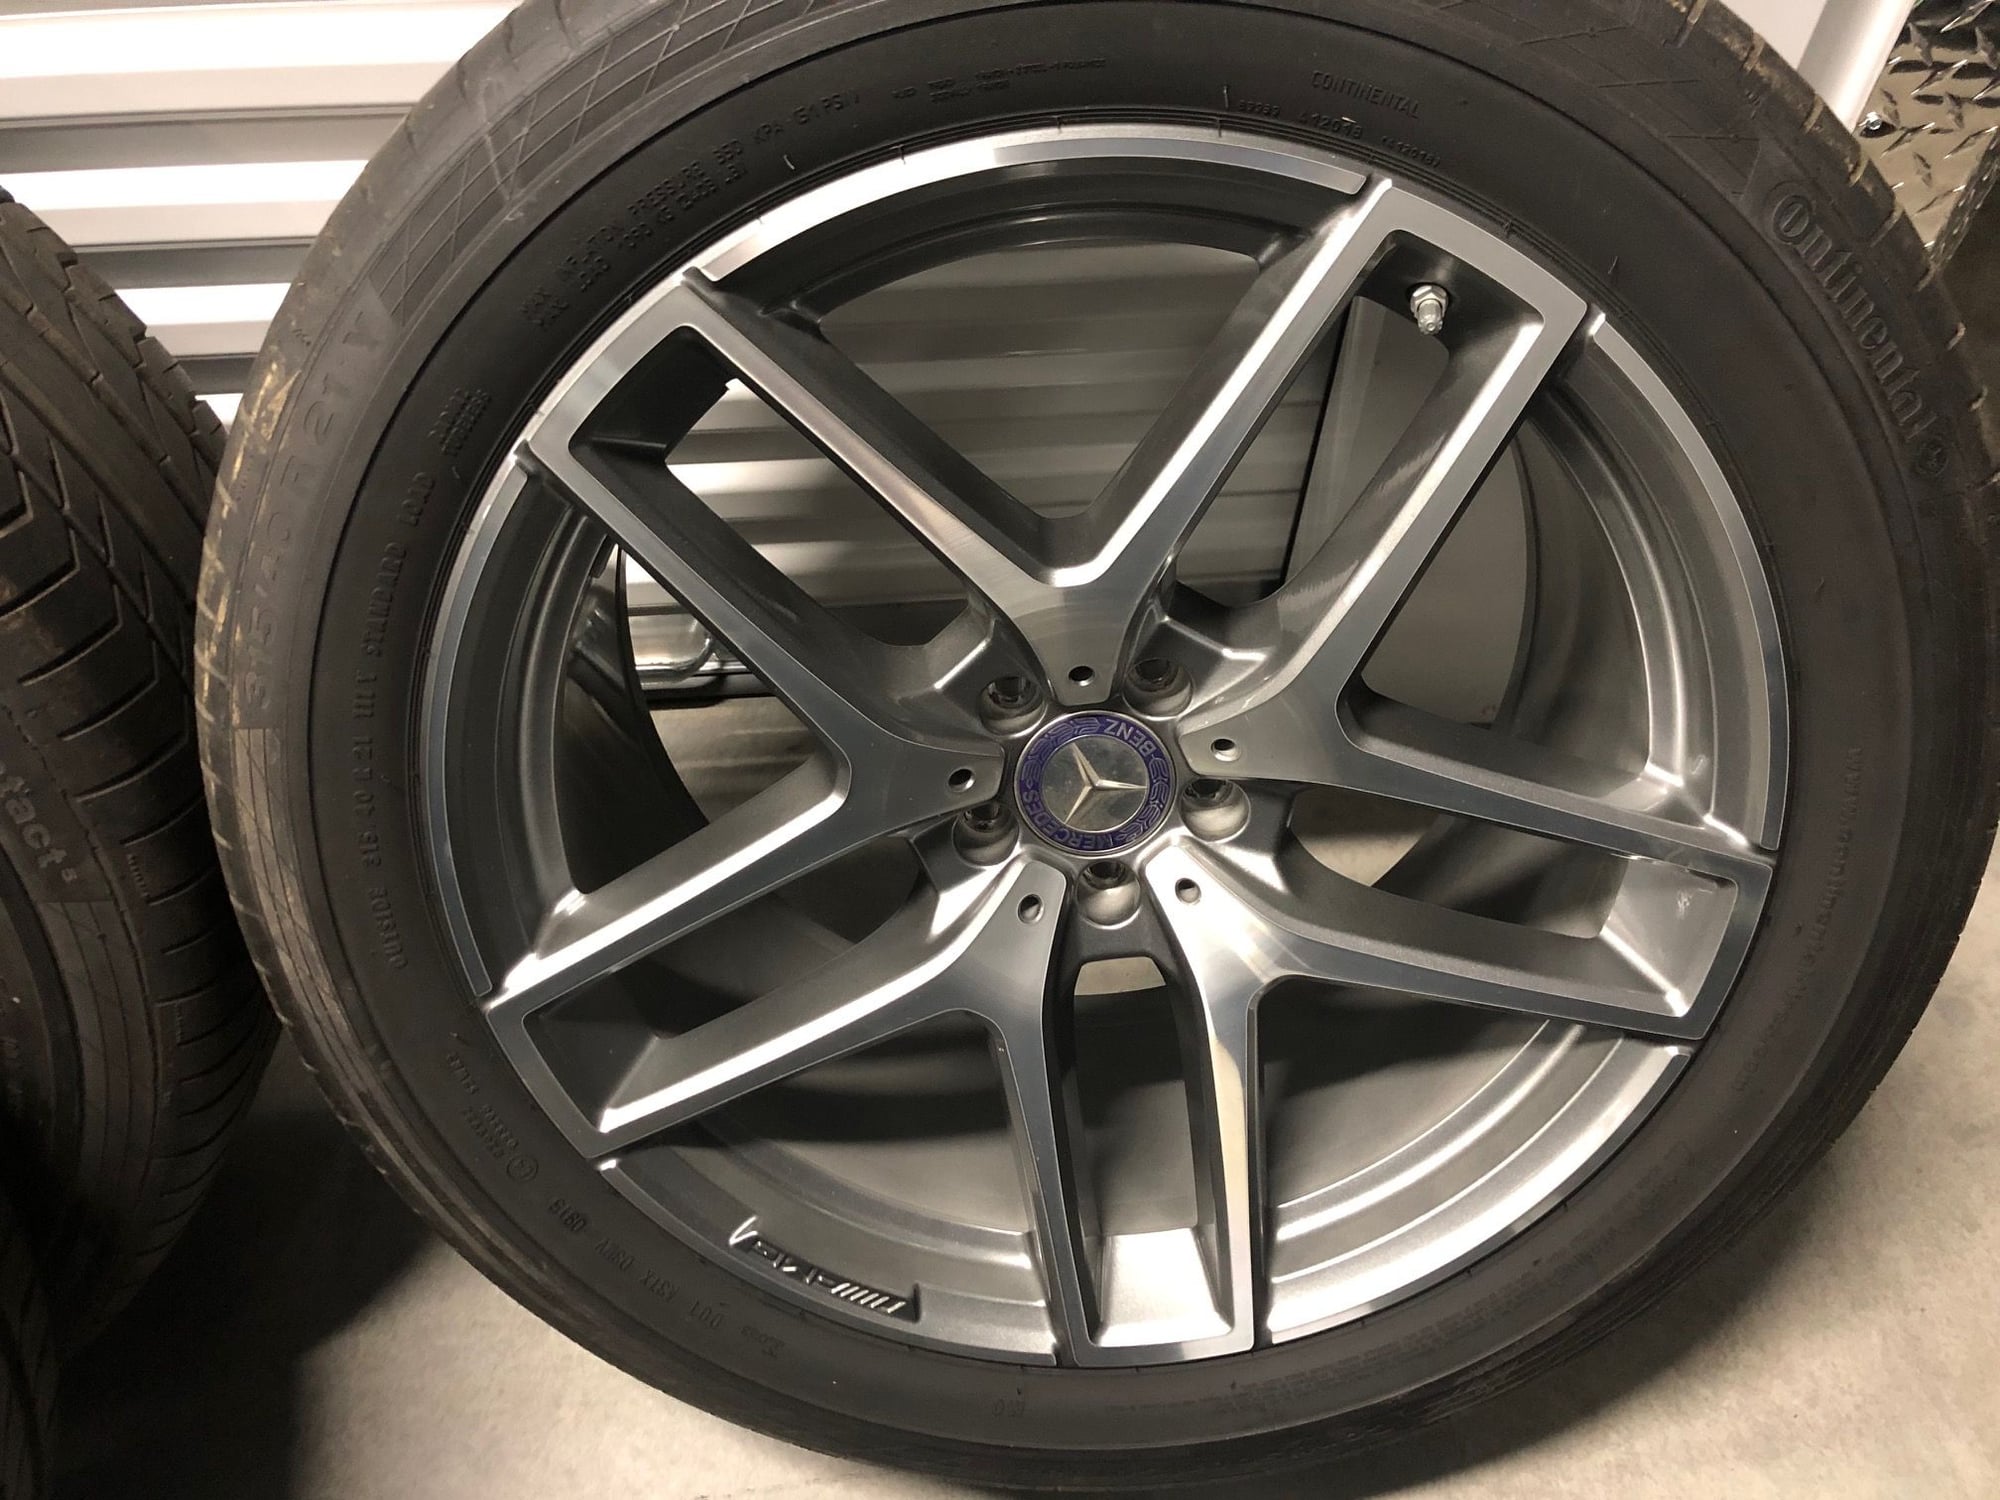 Wheels and Tires/Axles - 21" Mercedes Benz Wheels and tires with TPMS from a 2019 GLS63 - New - 2012 to 2020 Mercedes-Benz GLE43 AMG - Summit, NJ 07902, United States